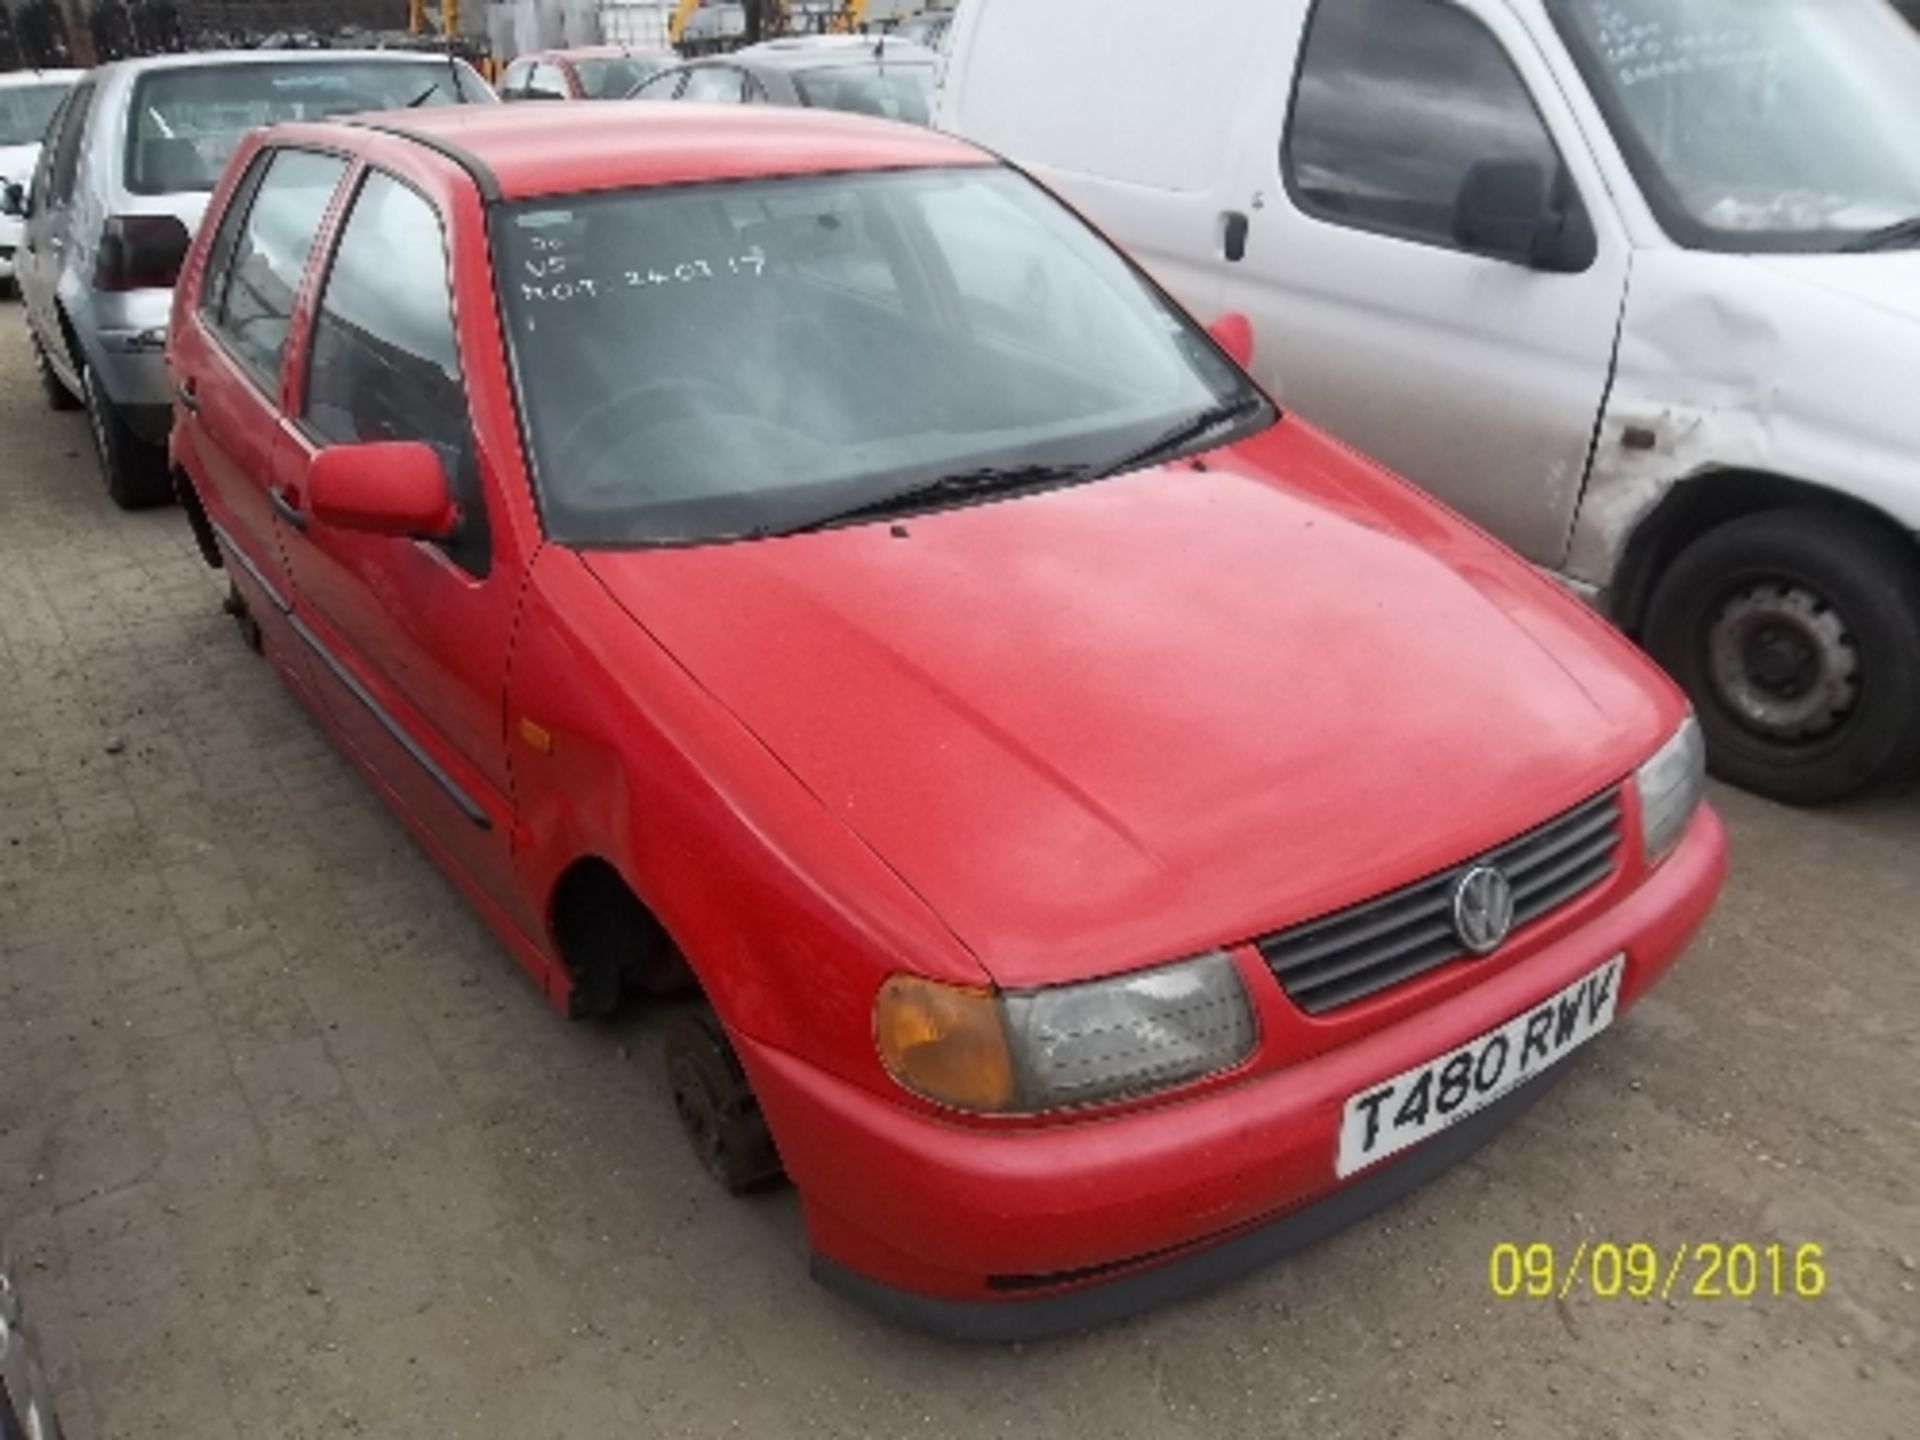 Volkswagen Polo 1.4 CL - T480 RWV Date of registration: 02.03.1999 1390cc, petrol, manual, red